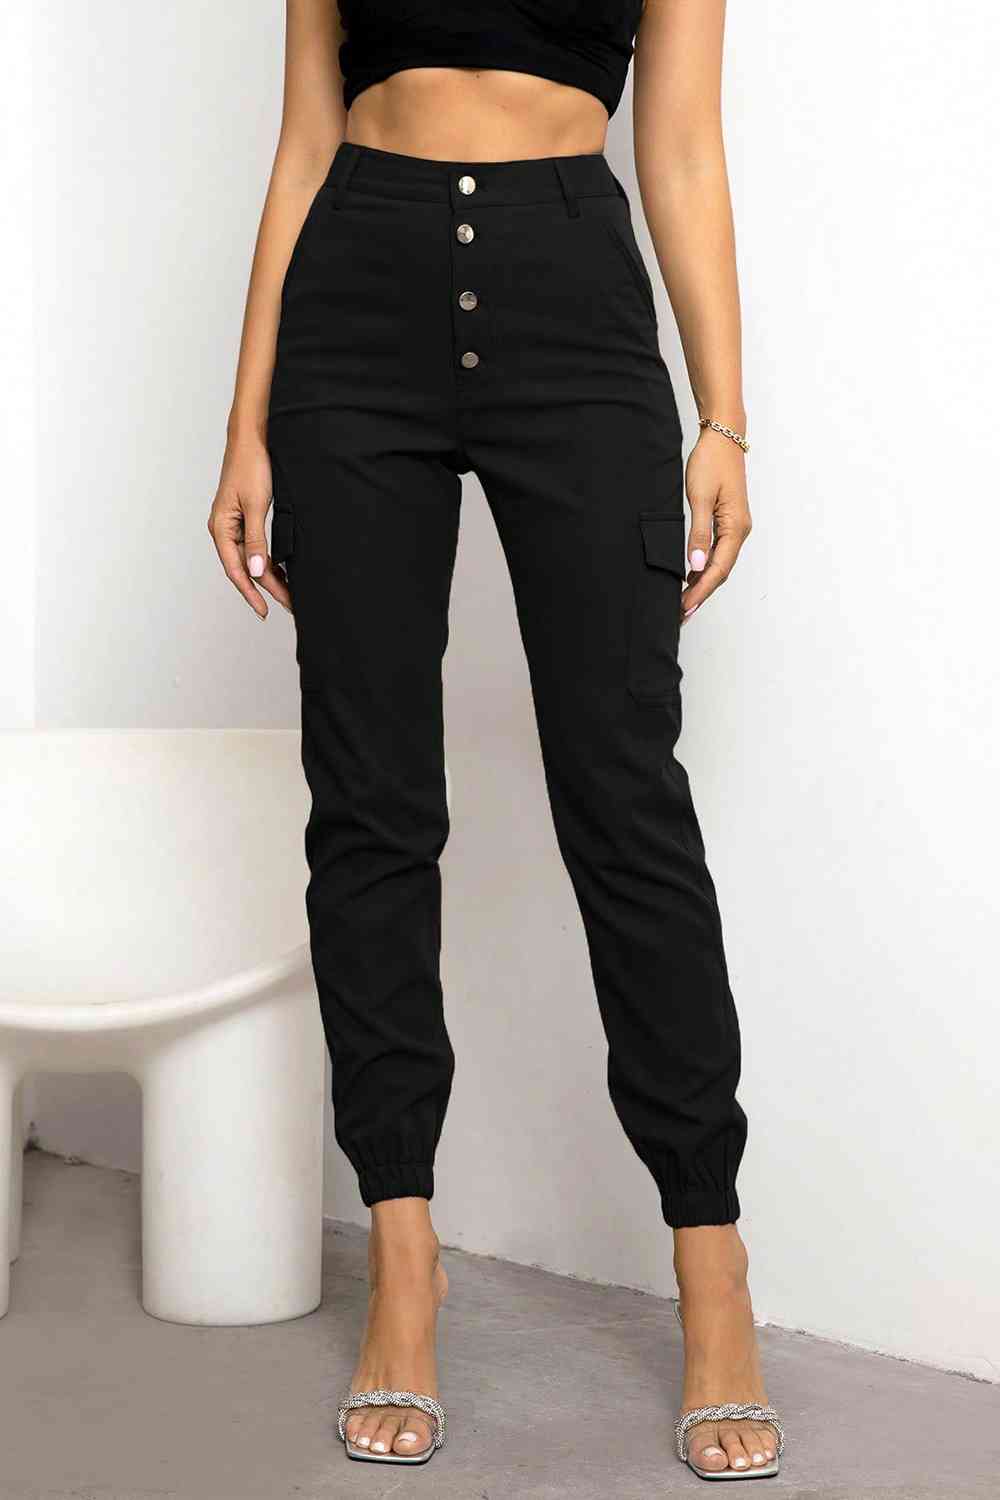 Khaki or Black, Button Fly Cargo Pants  Casual, Women's Activewear, Lounging